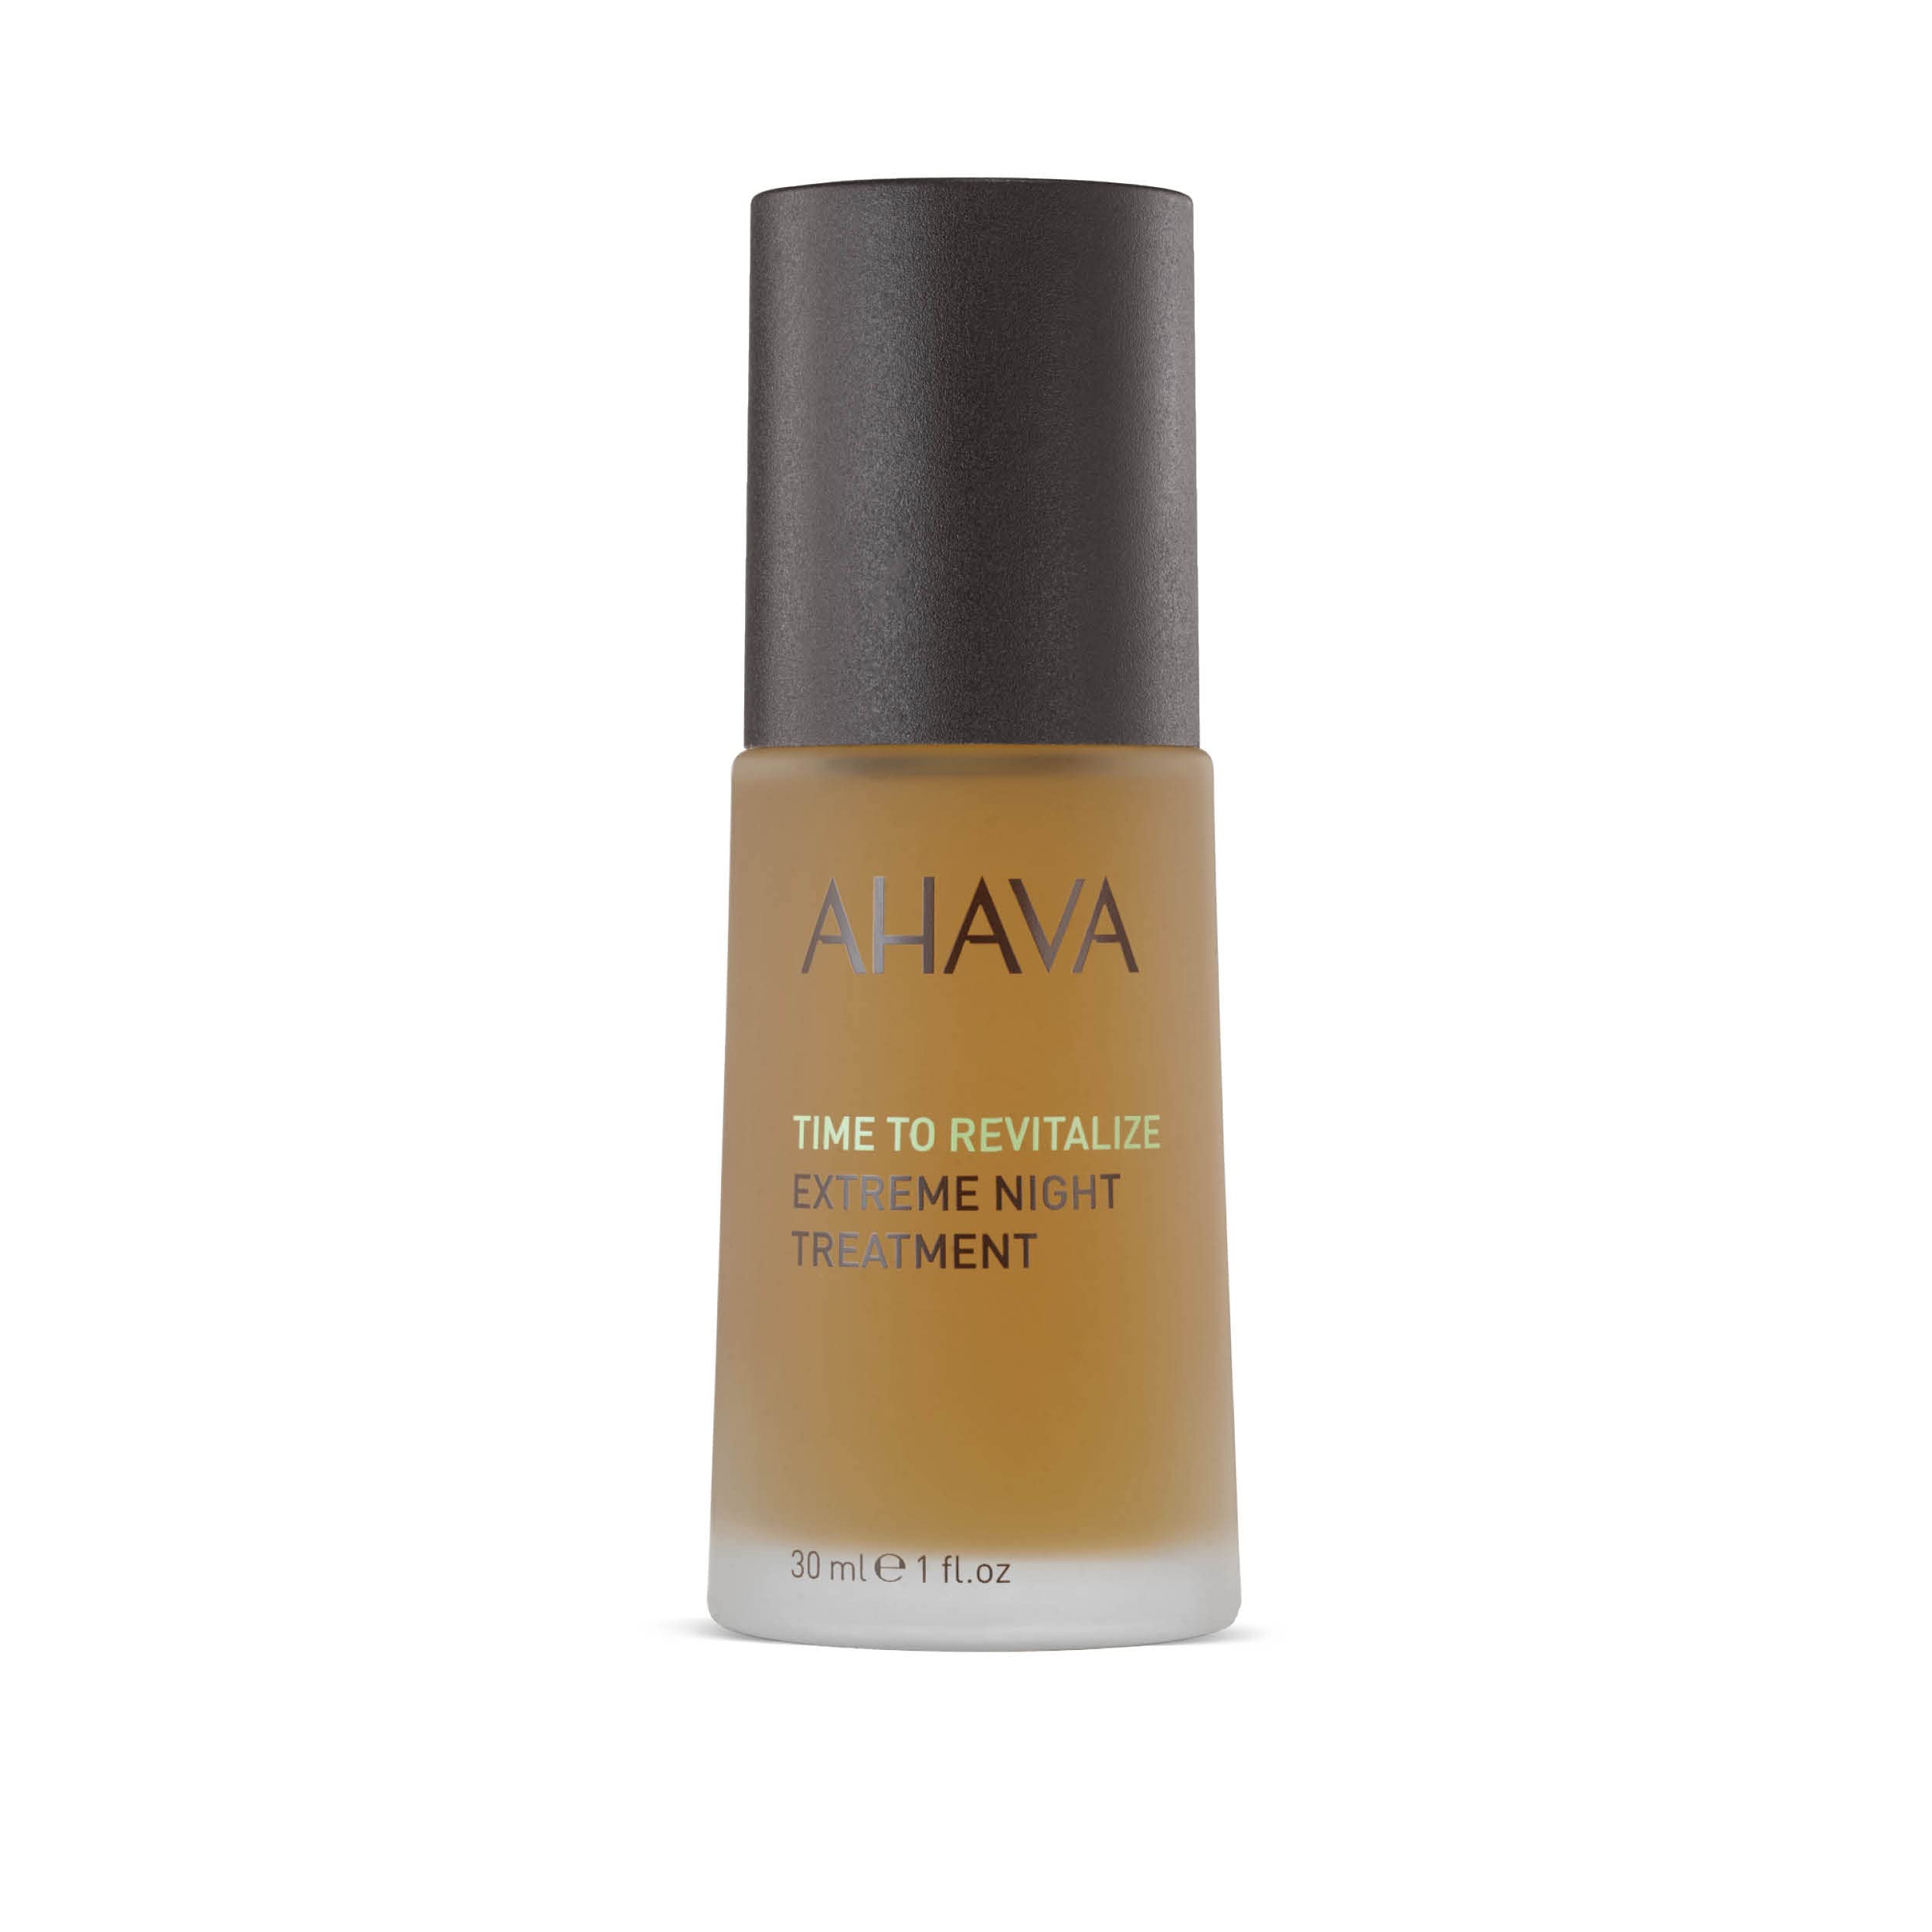 AHAVA Extreme Night Treatment - Exclusive Moisturizer, Neck & Chest Cream, Smoothes Skin & Reduces Wrinkles, Enriched with Patented Extreme Complex, Dead Sea Osmoter, Peptides & Resveratrol 1 Fl.Oz